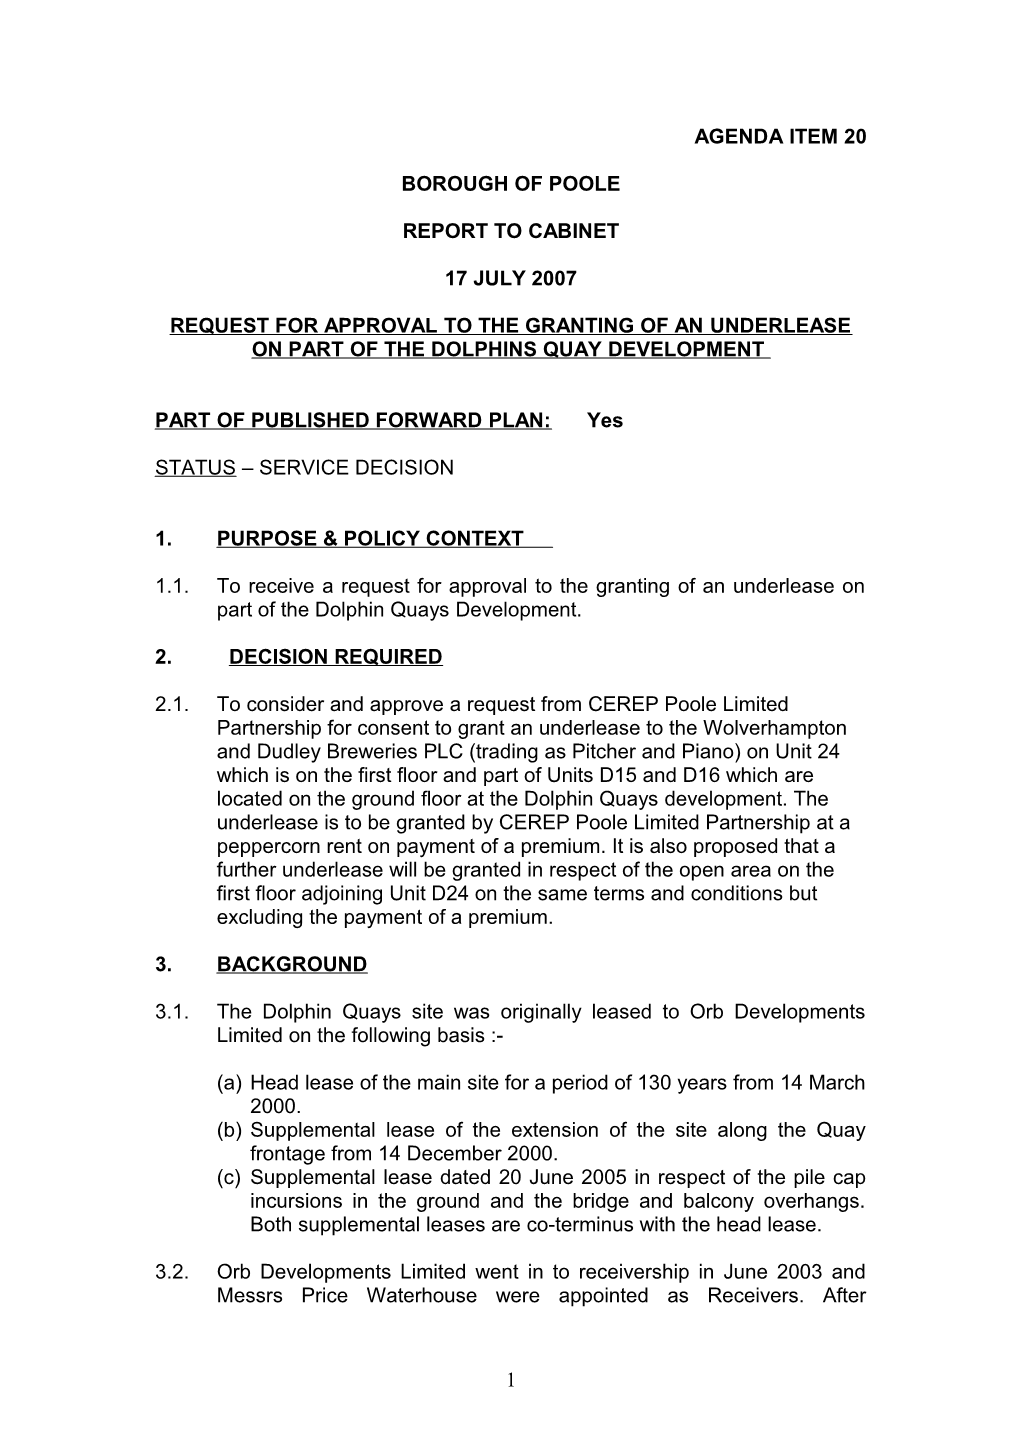 Request for Approval to the Granting of an Underlease on Part of the Dolphins Quay Development